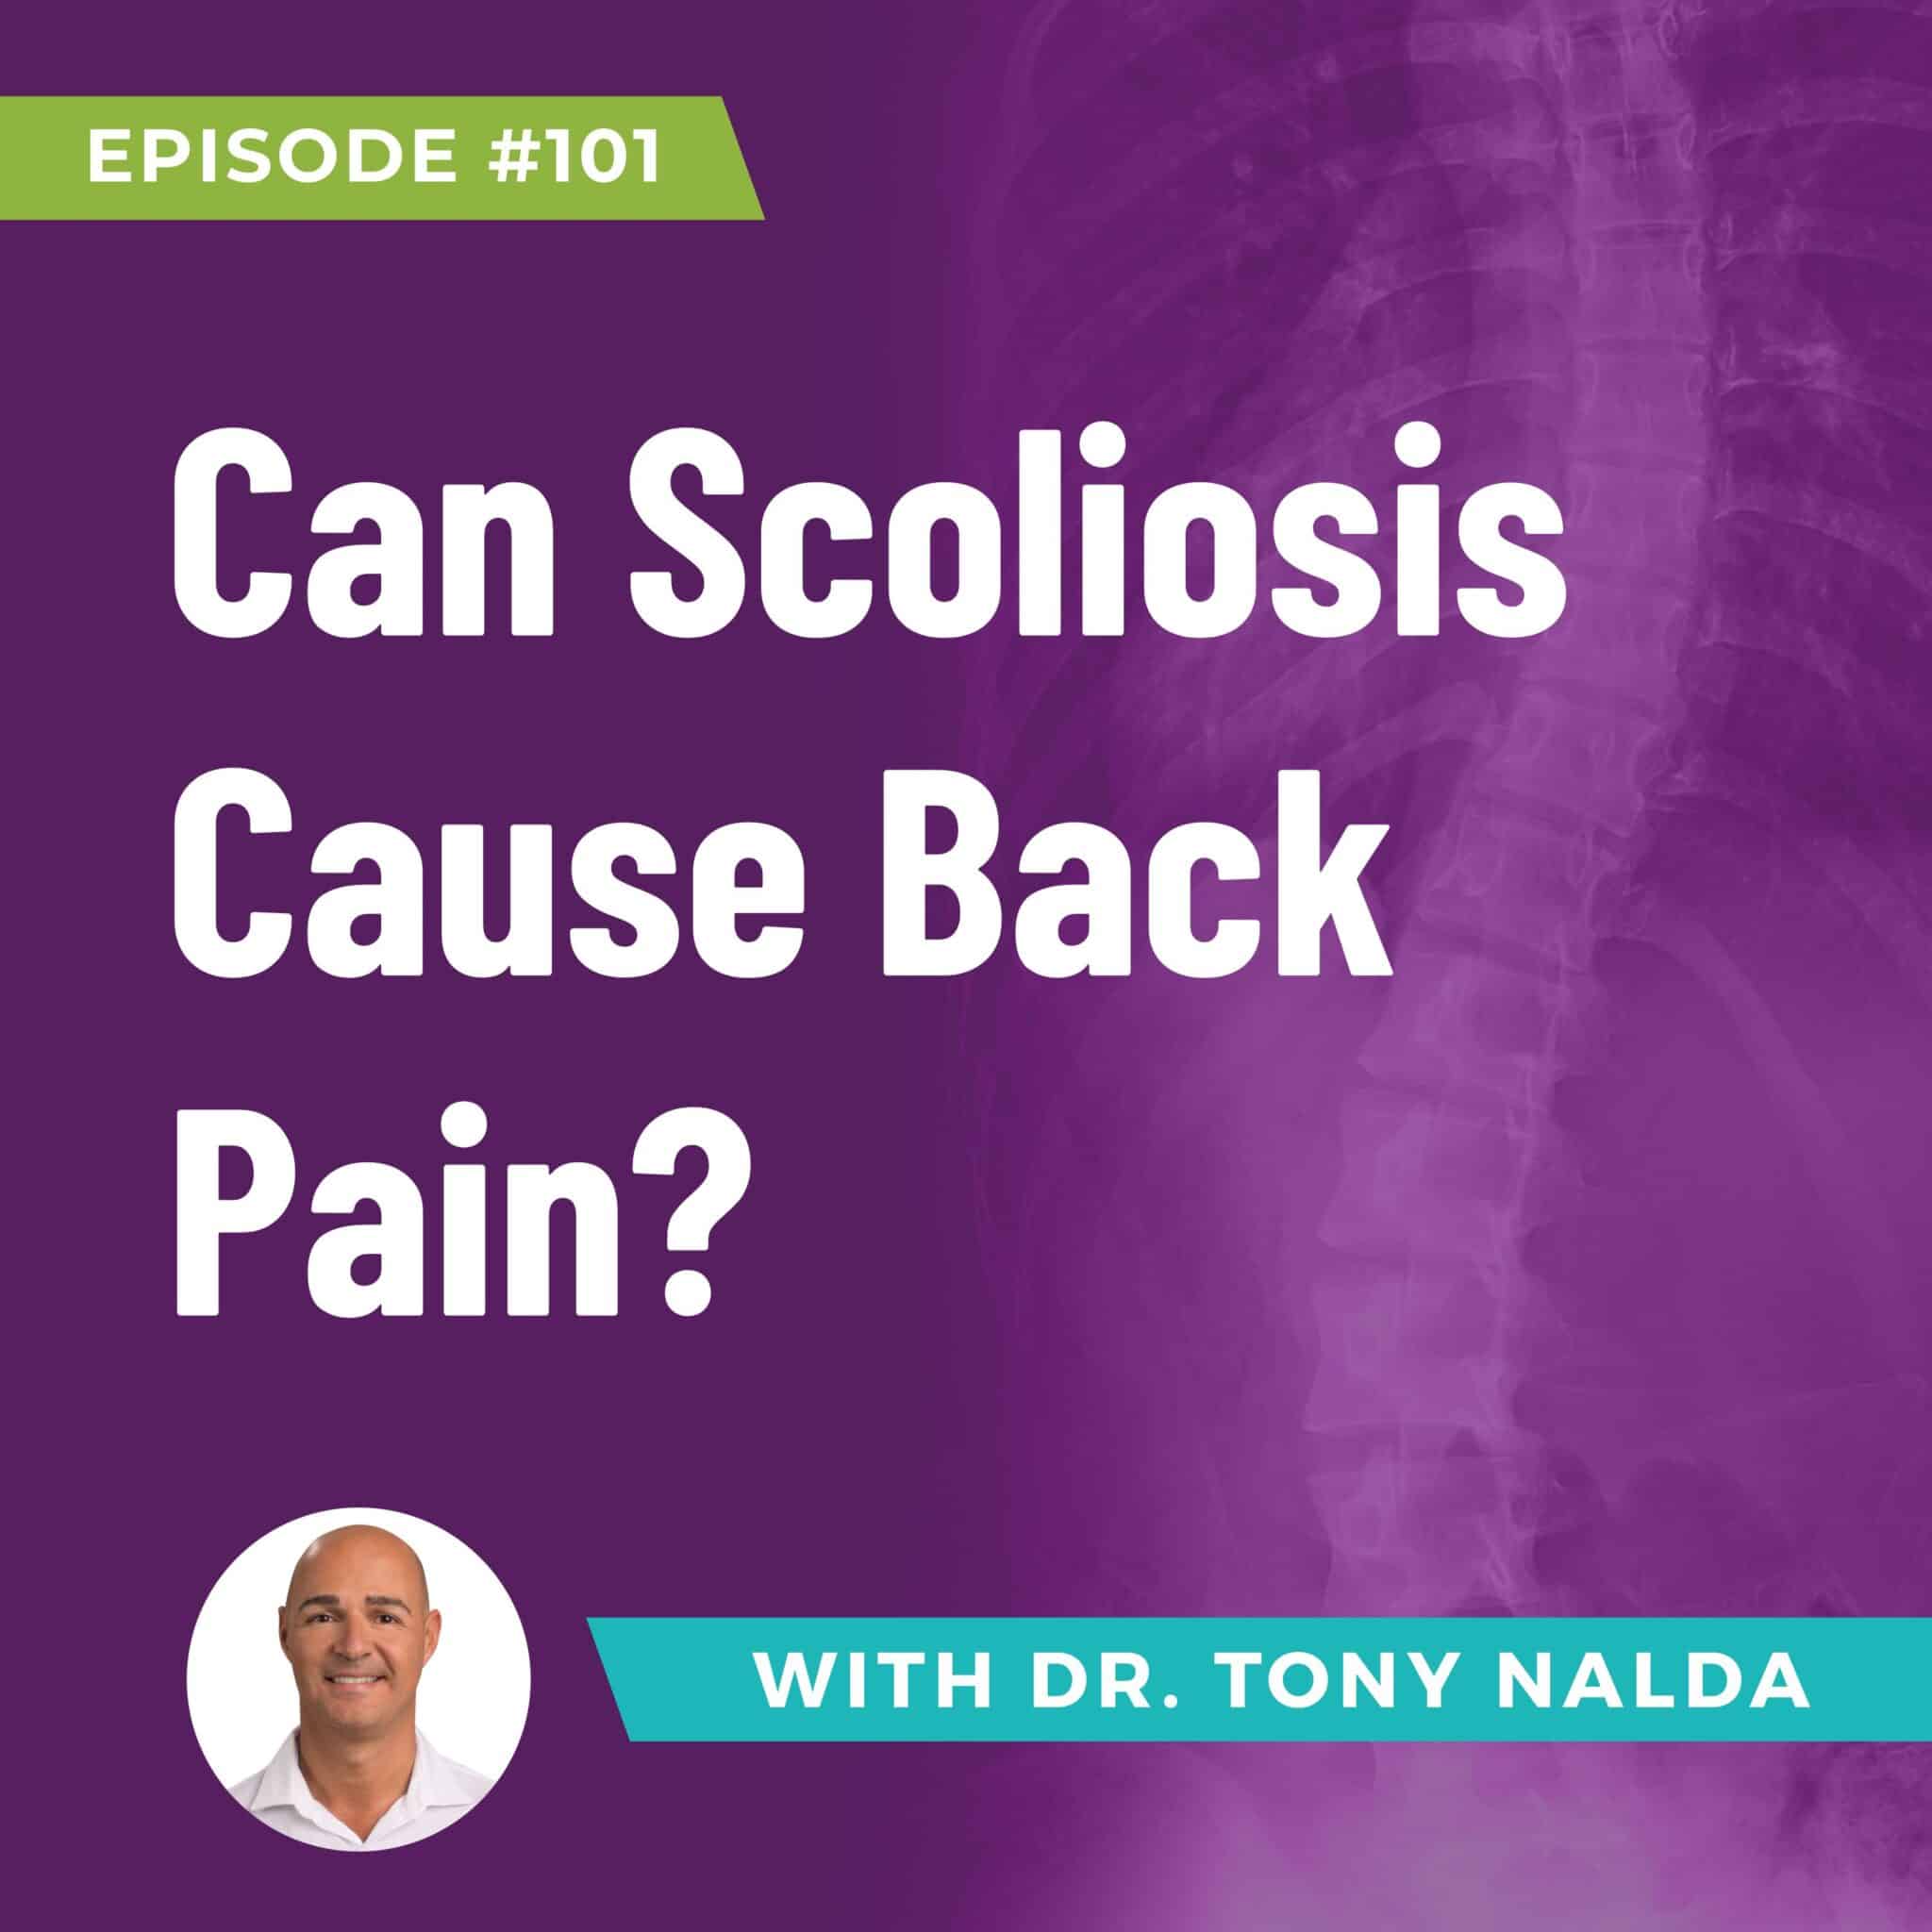 Can Scoliosis Cause Back Pain